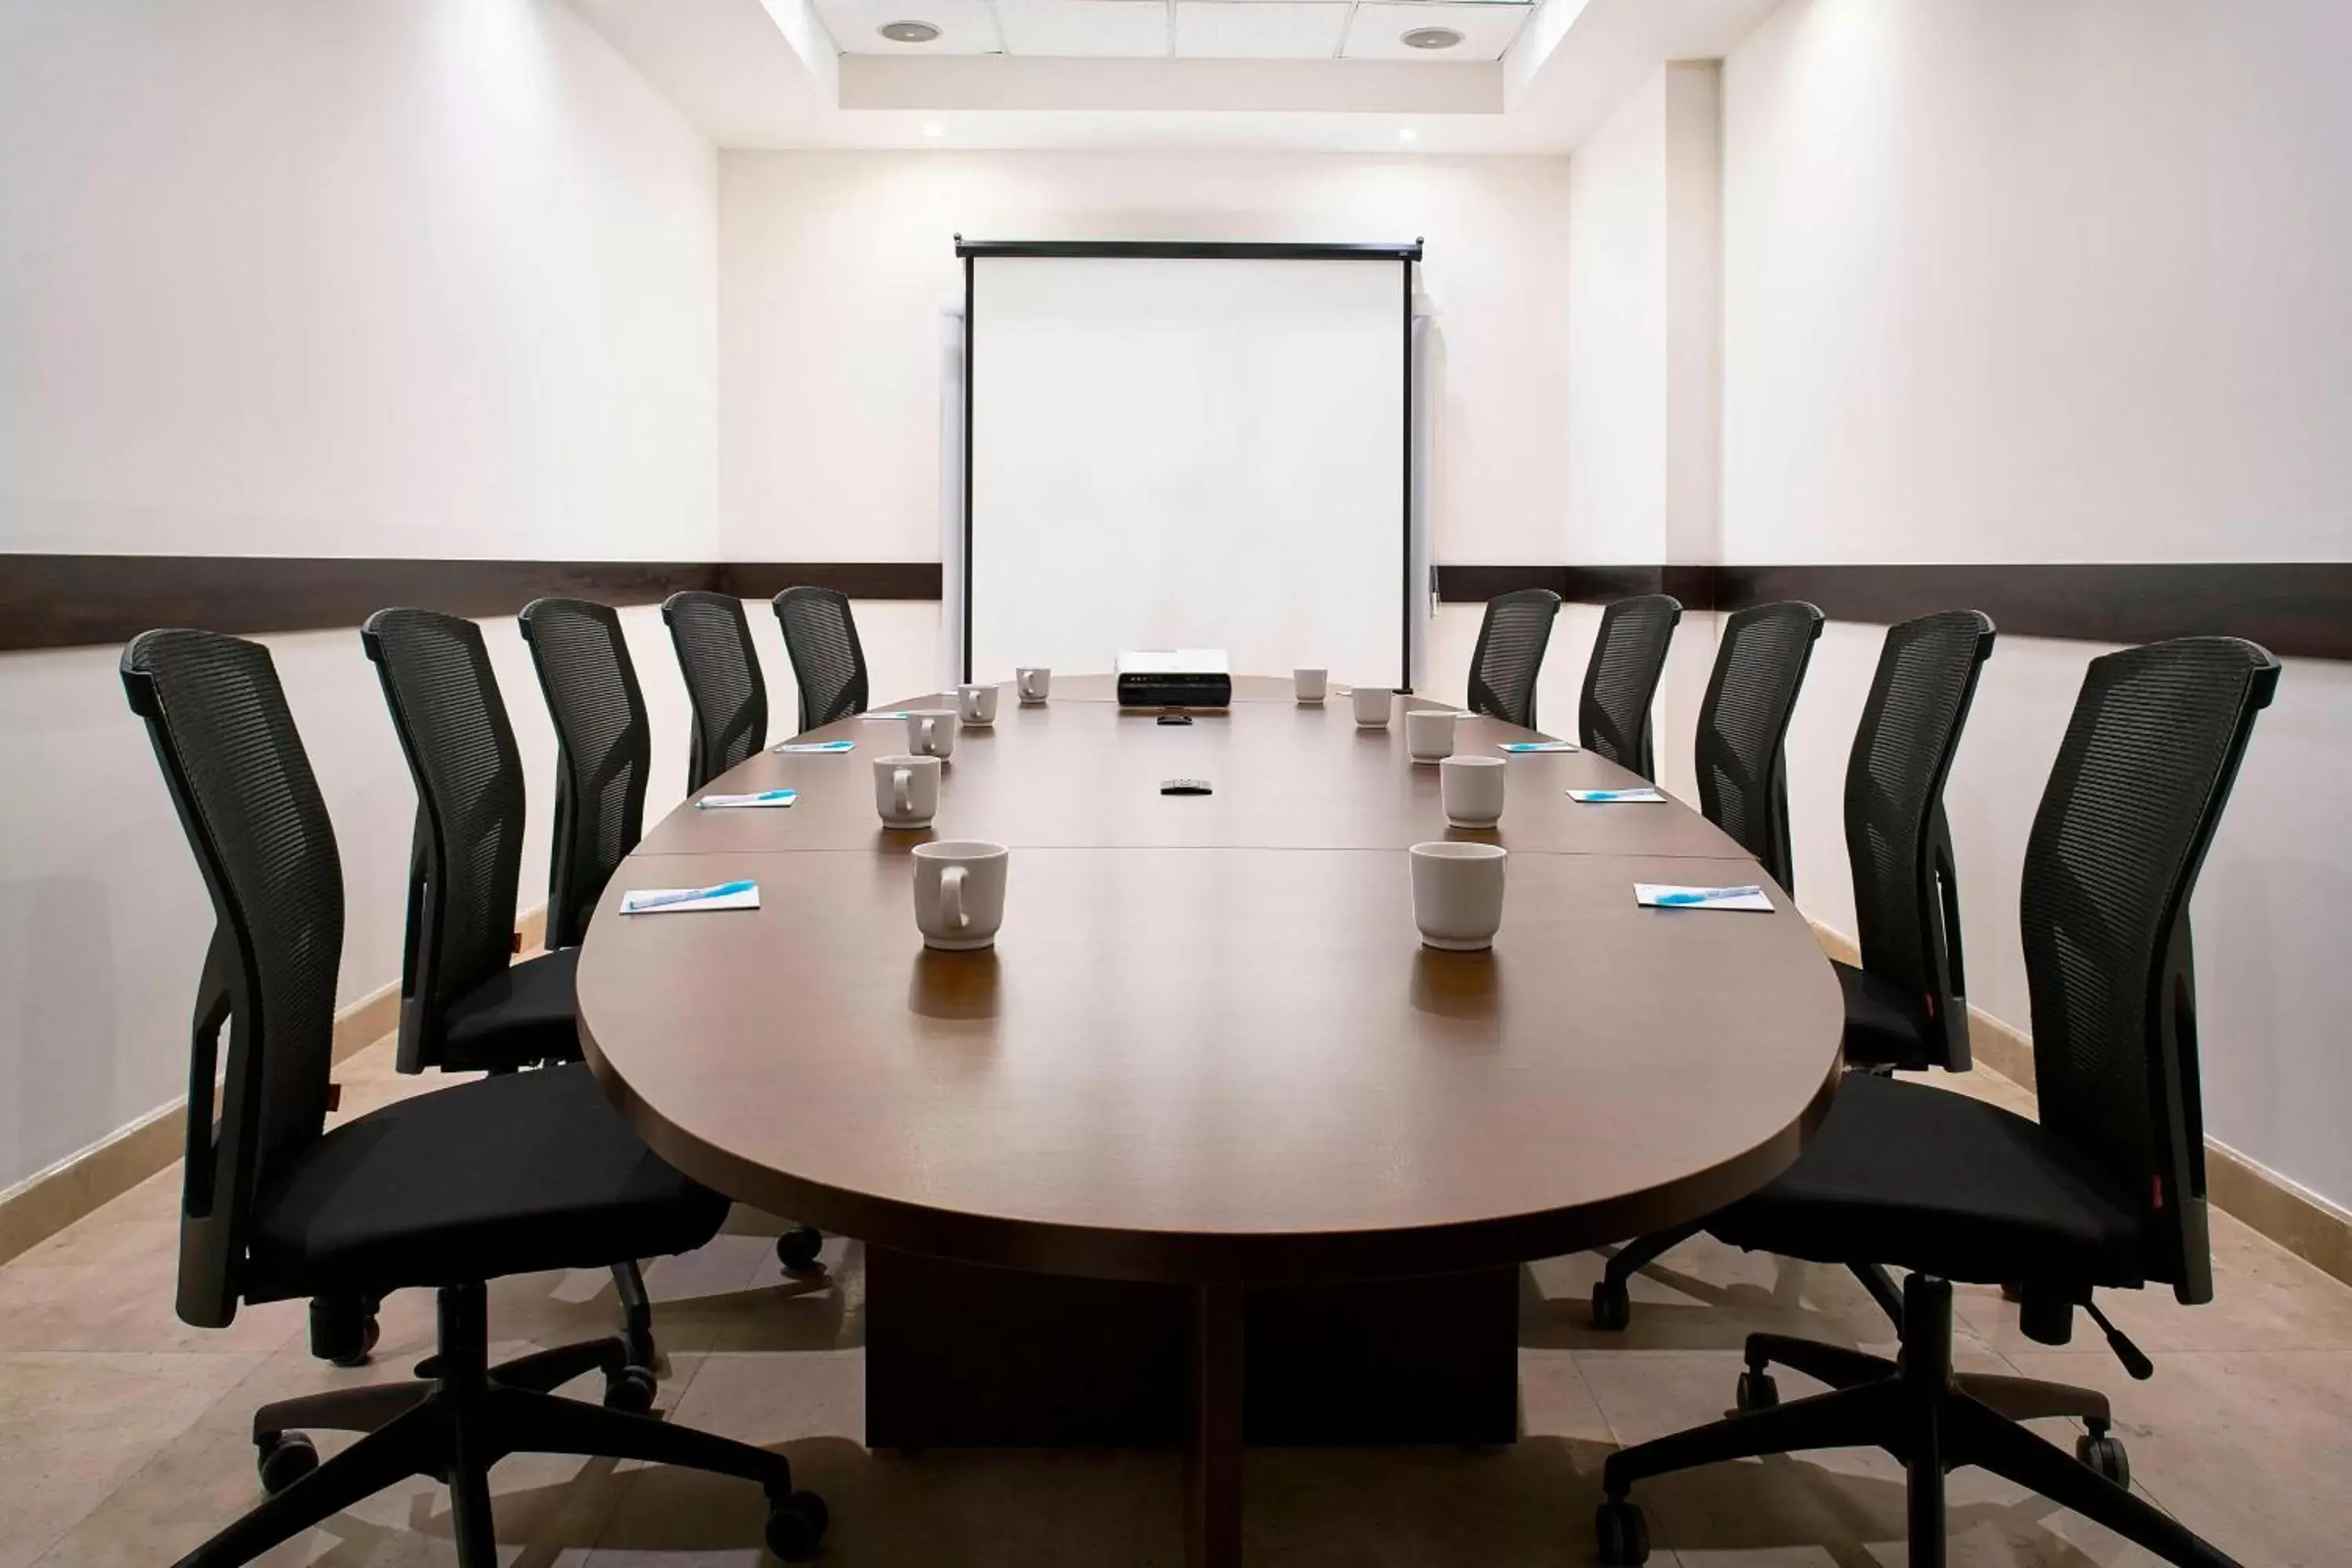 Meeting/conference room in Fairfield by Marriott Los Cabos